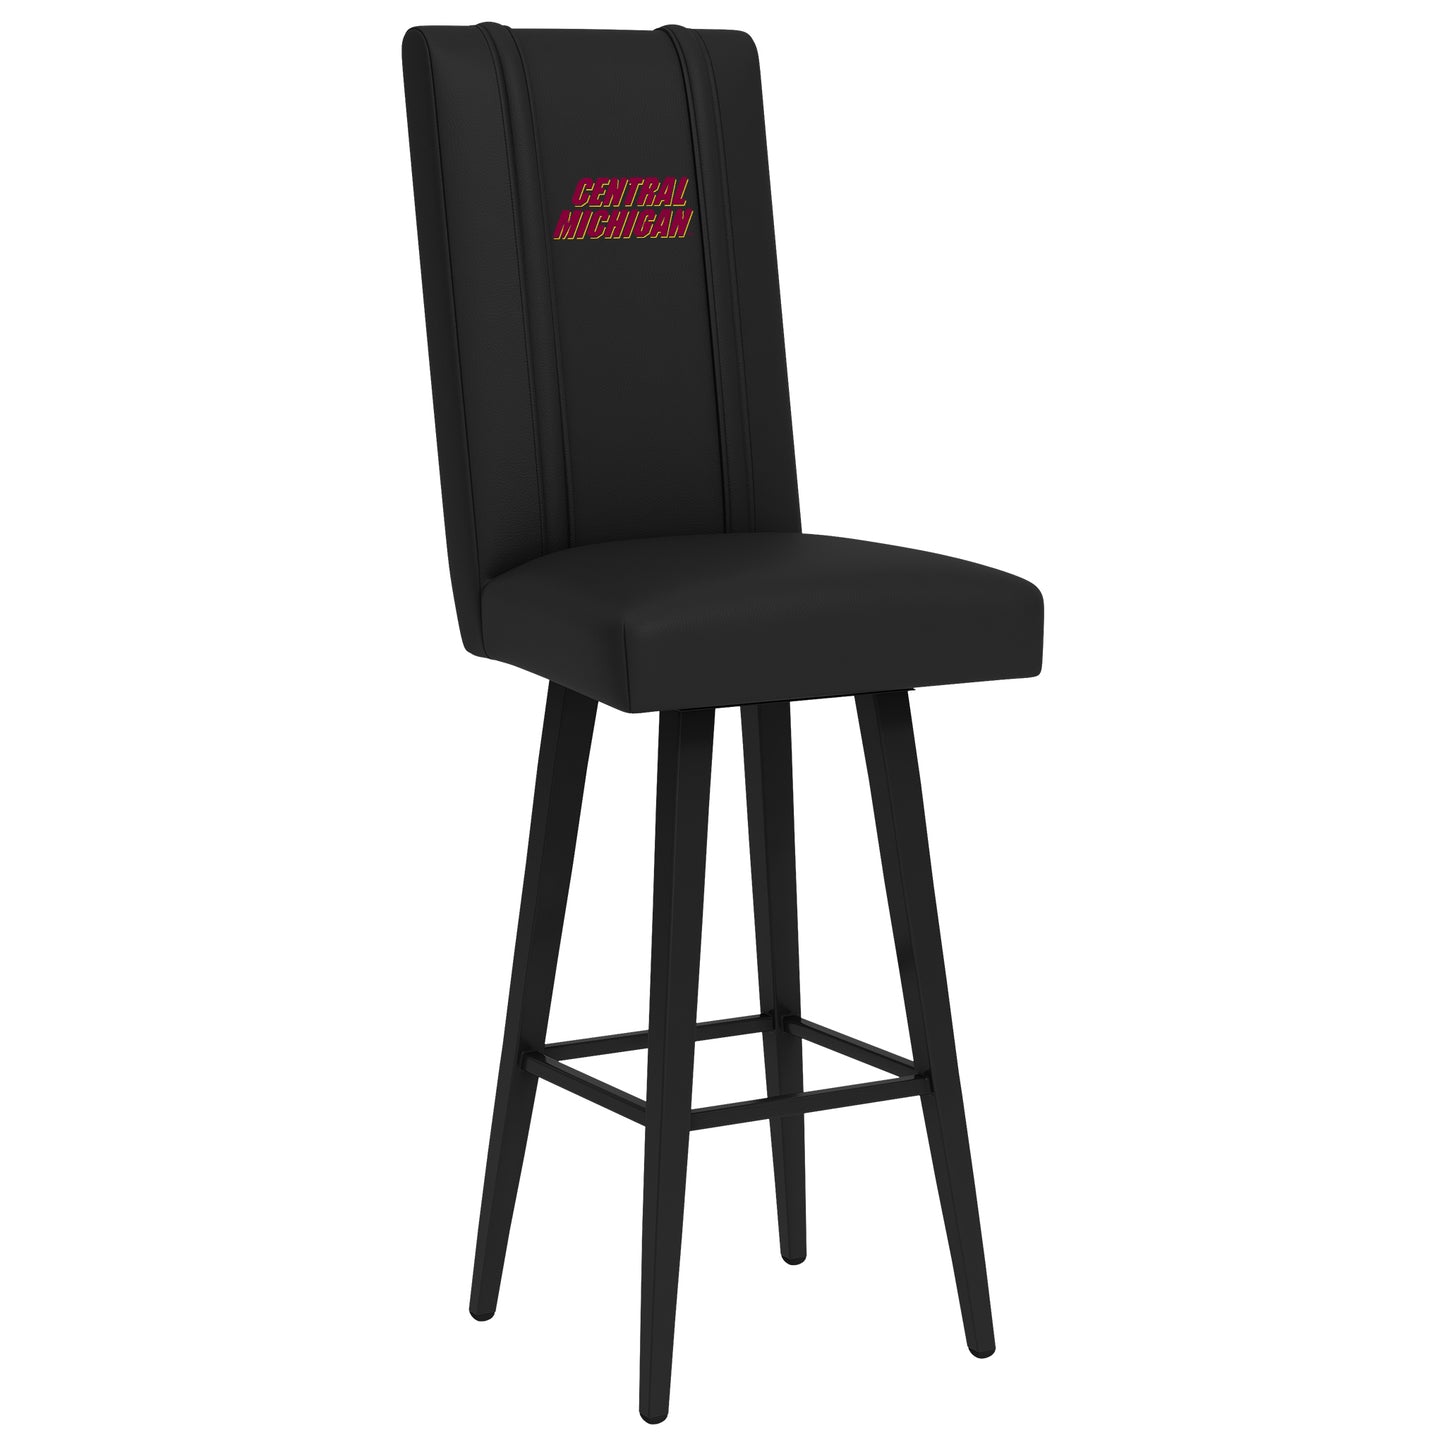 Swivel Bar Stool 2000 with Central Michigan Secondary